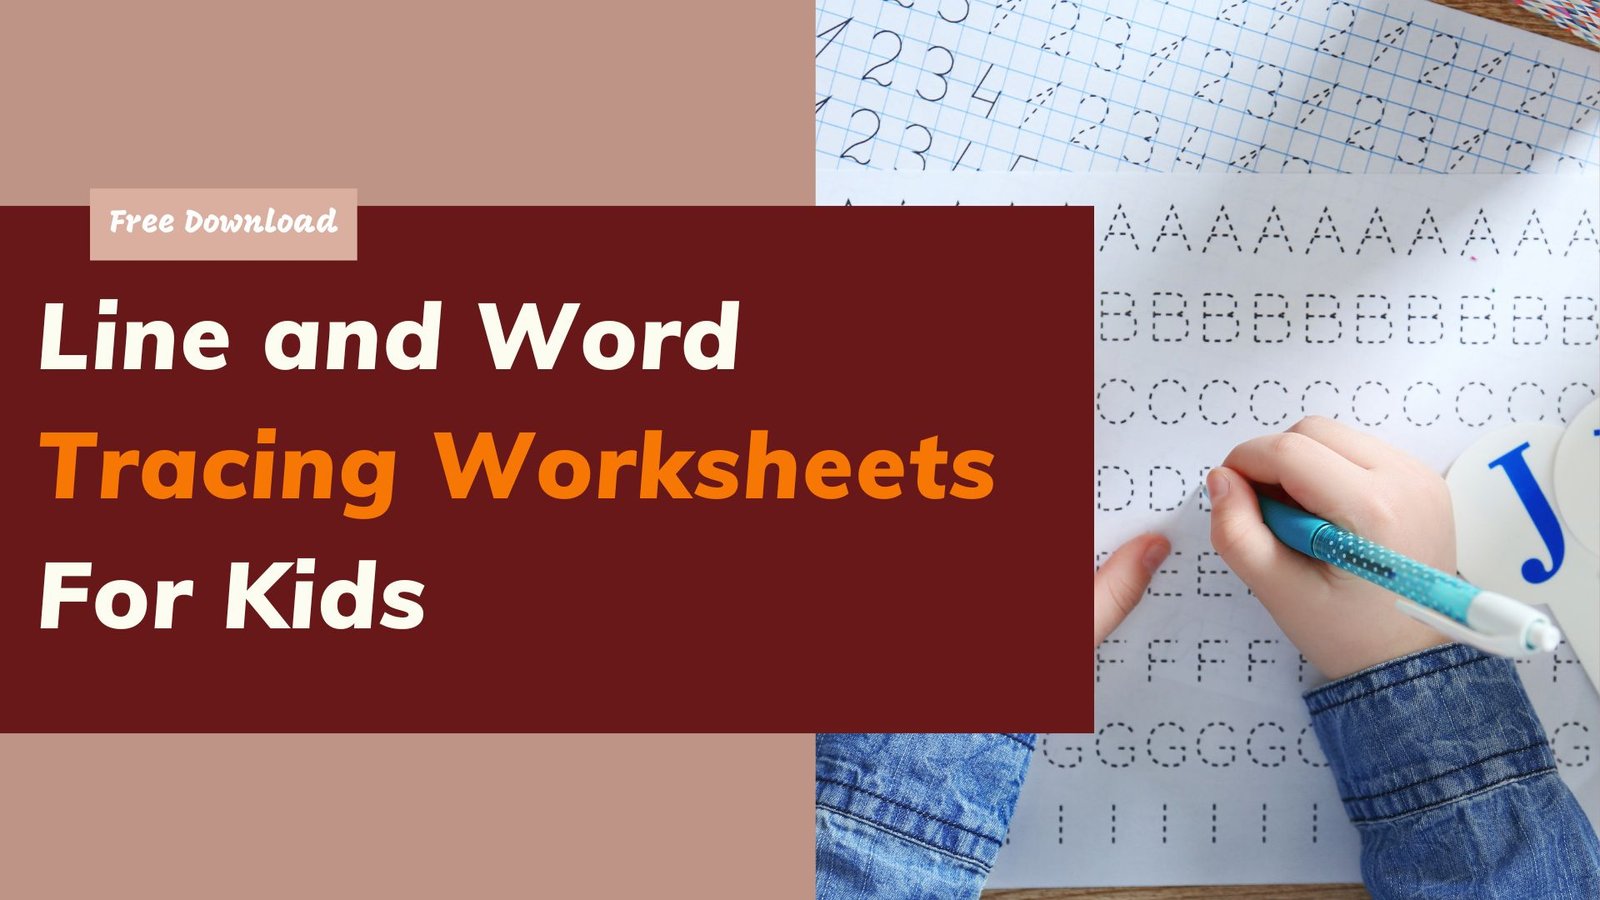 20 Line and Word Tracing Worksheets For kids